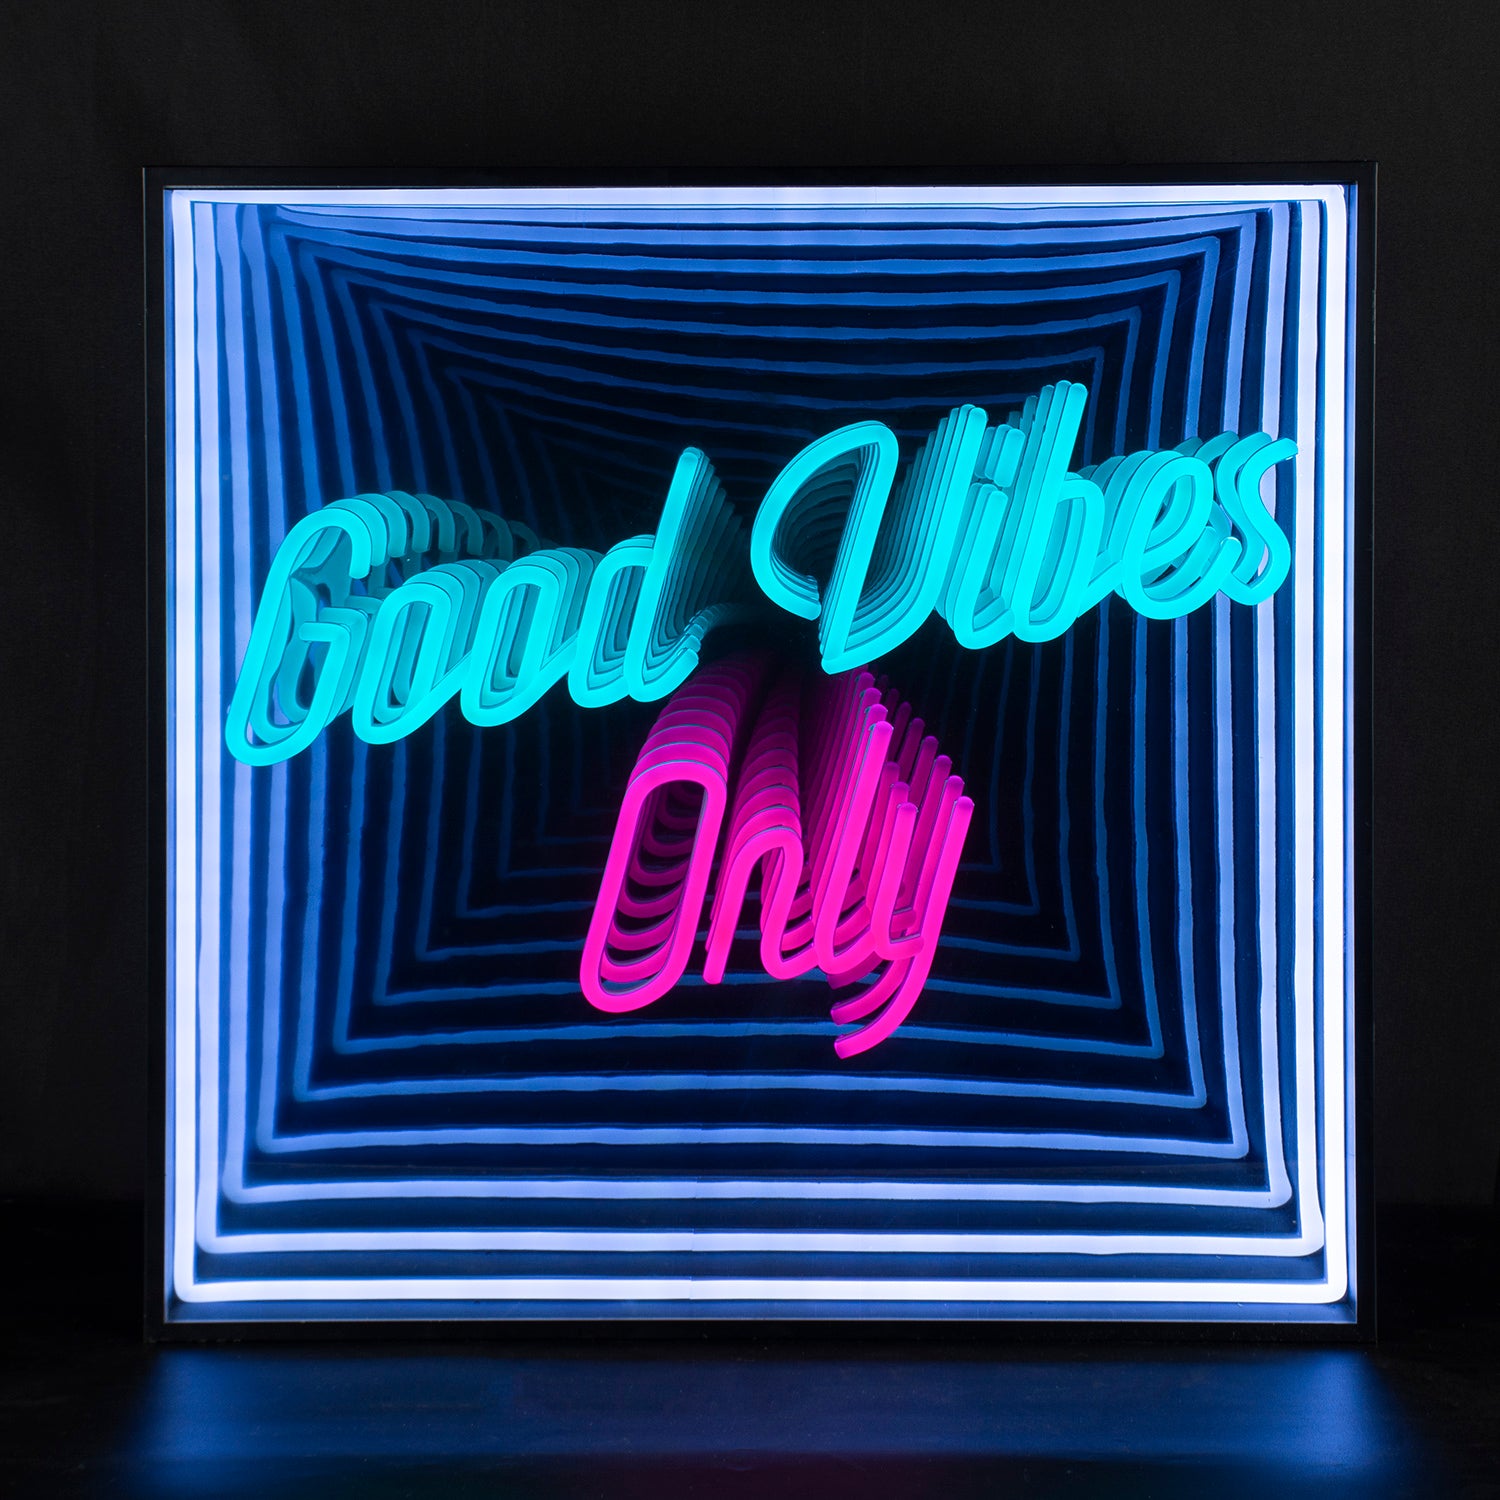 Good Vibes Only - Led Neon Sign Quotes